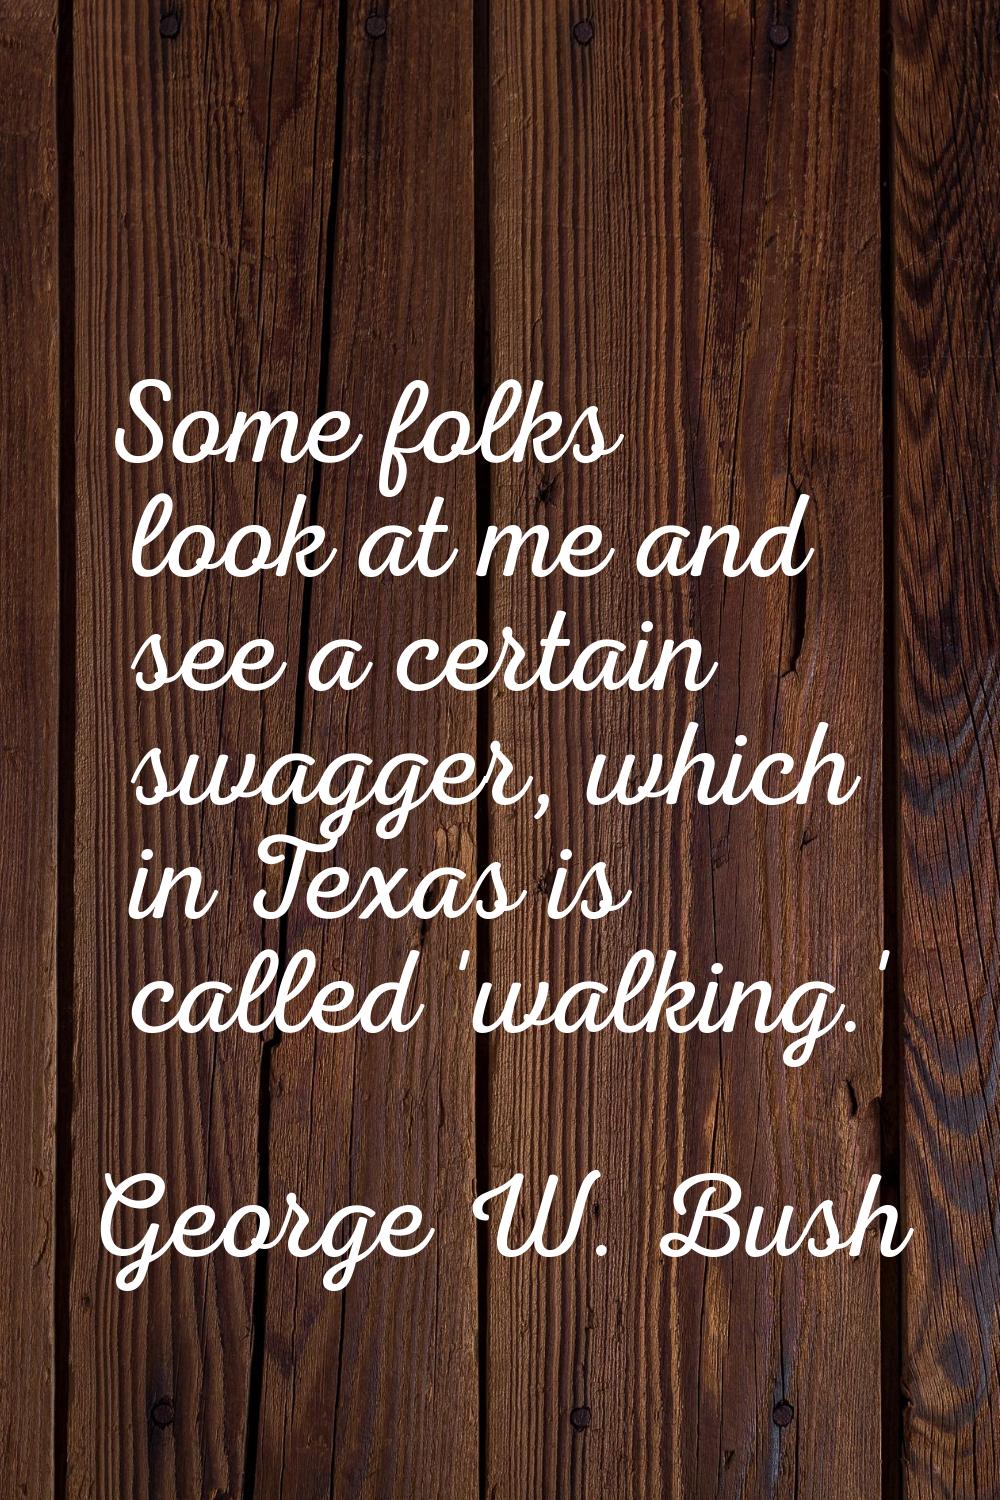 Some folks look at me and see a certain swagger, which in Texas is called 'walking.'